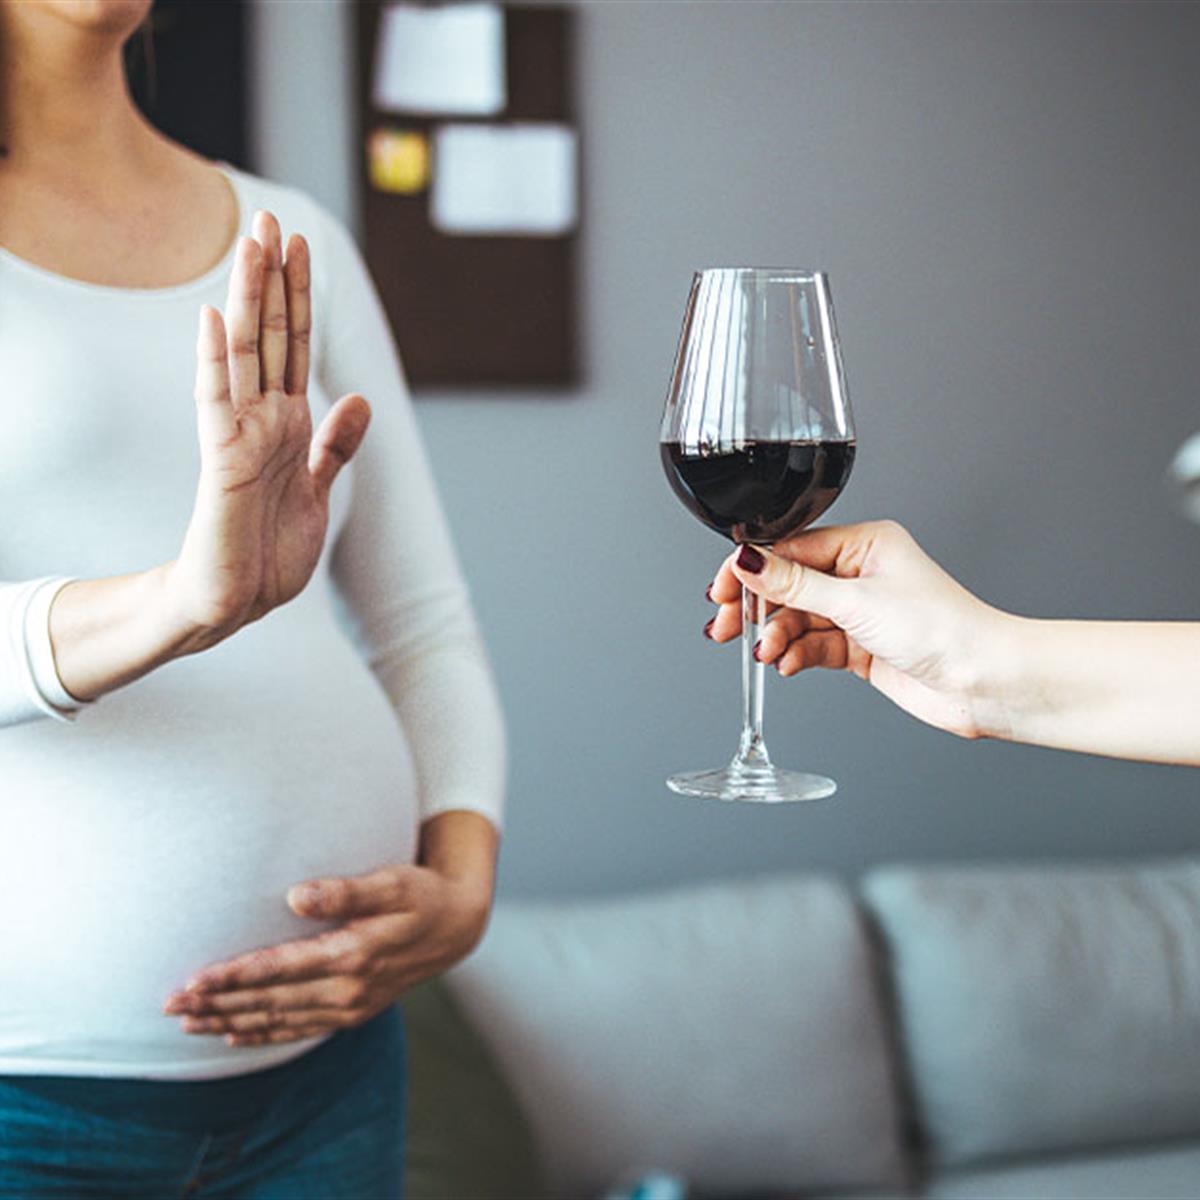 https://www.healthychildren.org/SiteCollectionImagesArticleImages/fetal-alcohol-spectrum-disorders-FAQs-of-parents-and-families.jpg?RenditionID=6